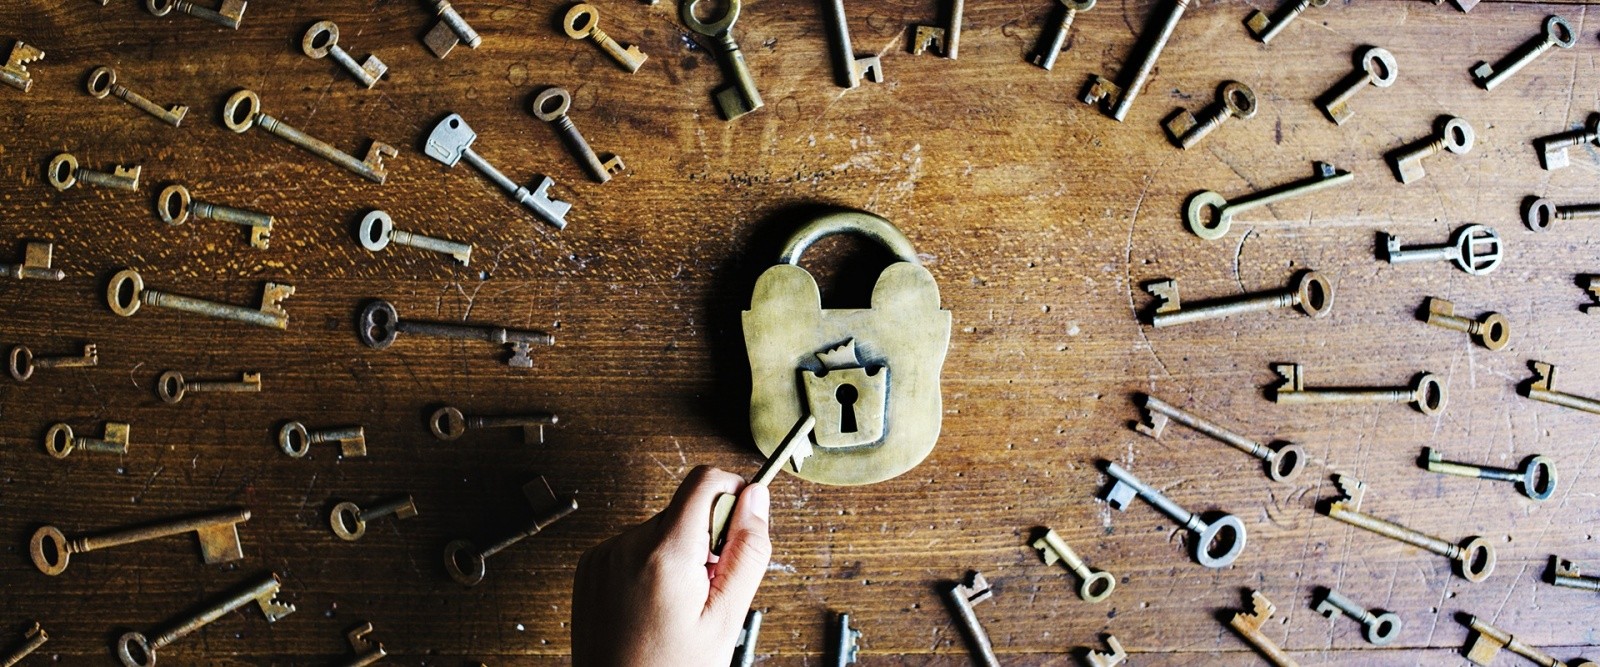 Facts You Didn't Know About Locks & Keys